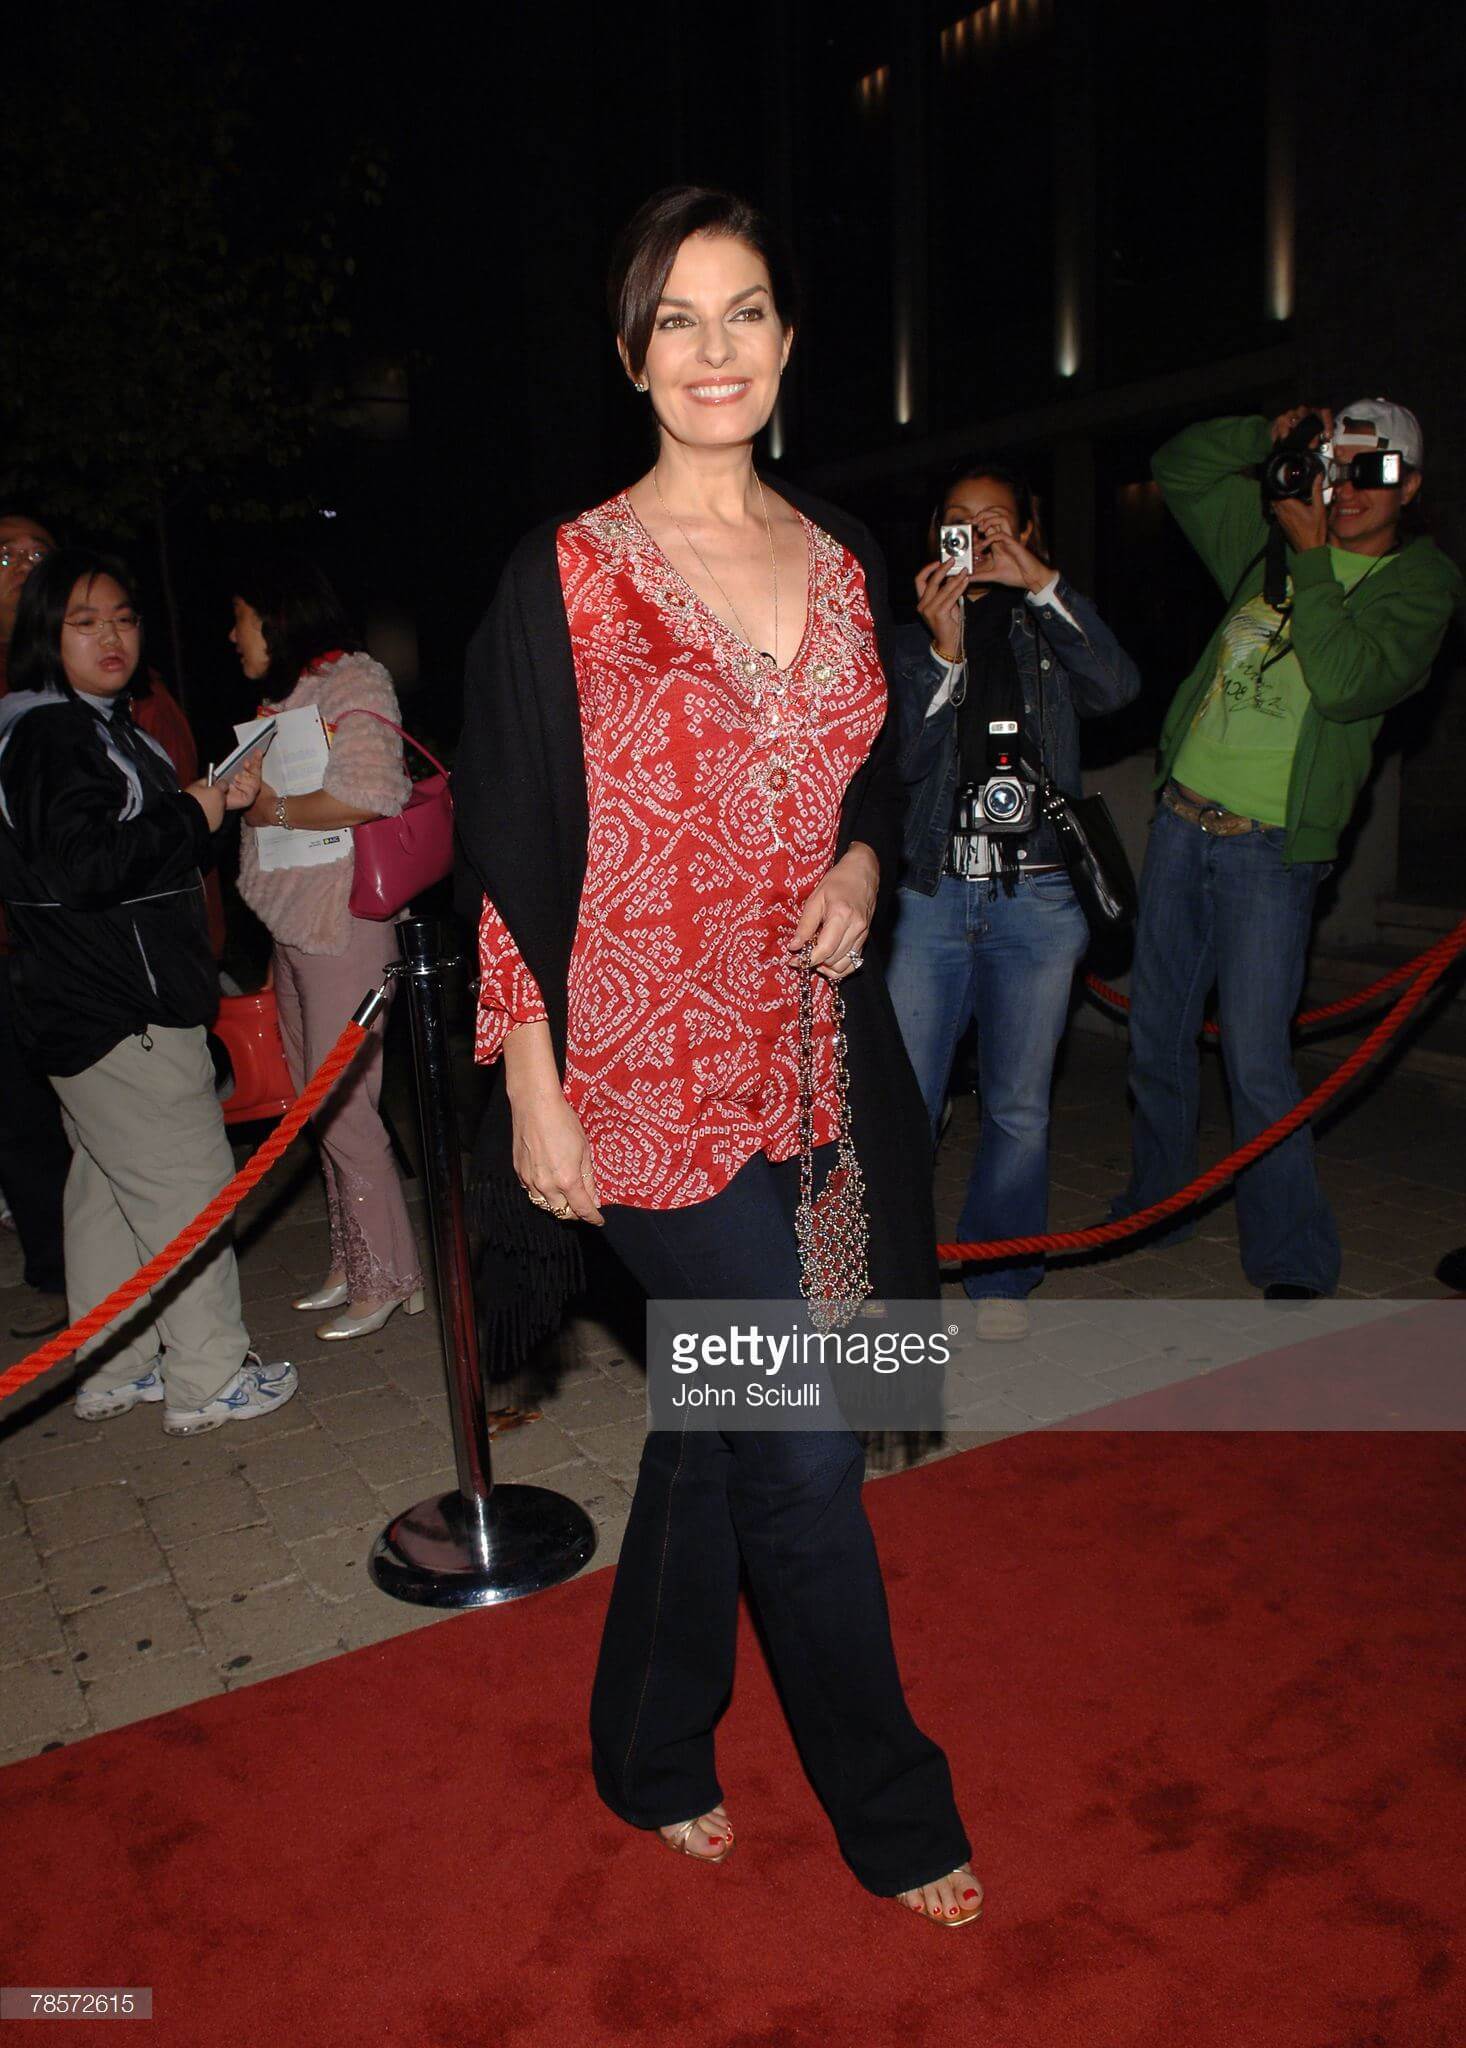 60+ Hot Pictures Of Sela Ward Will Drive You Nuts For Her | Best Of Comic Books